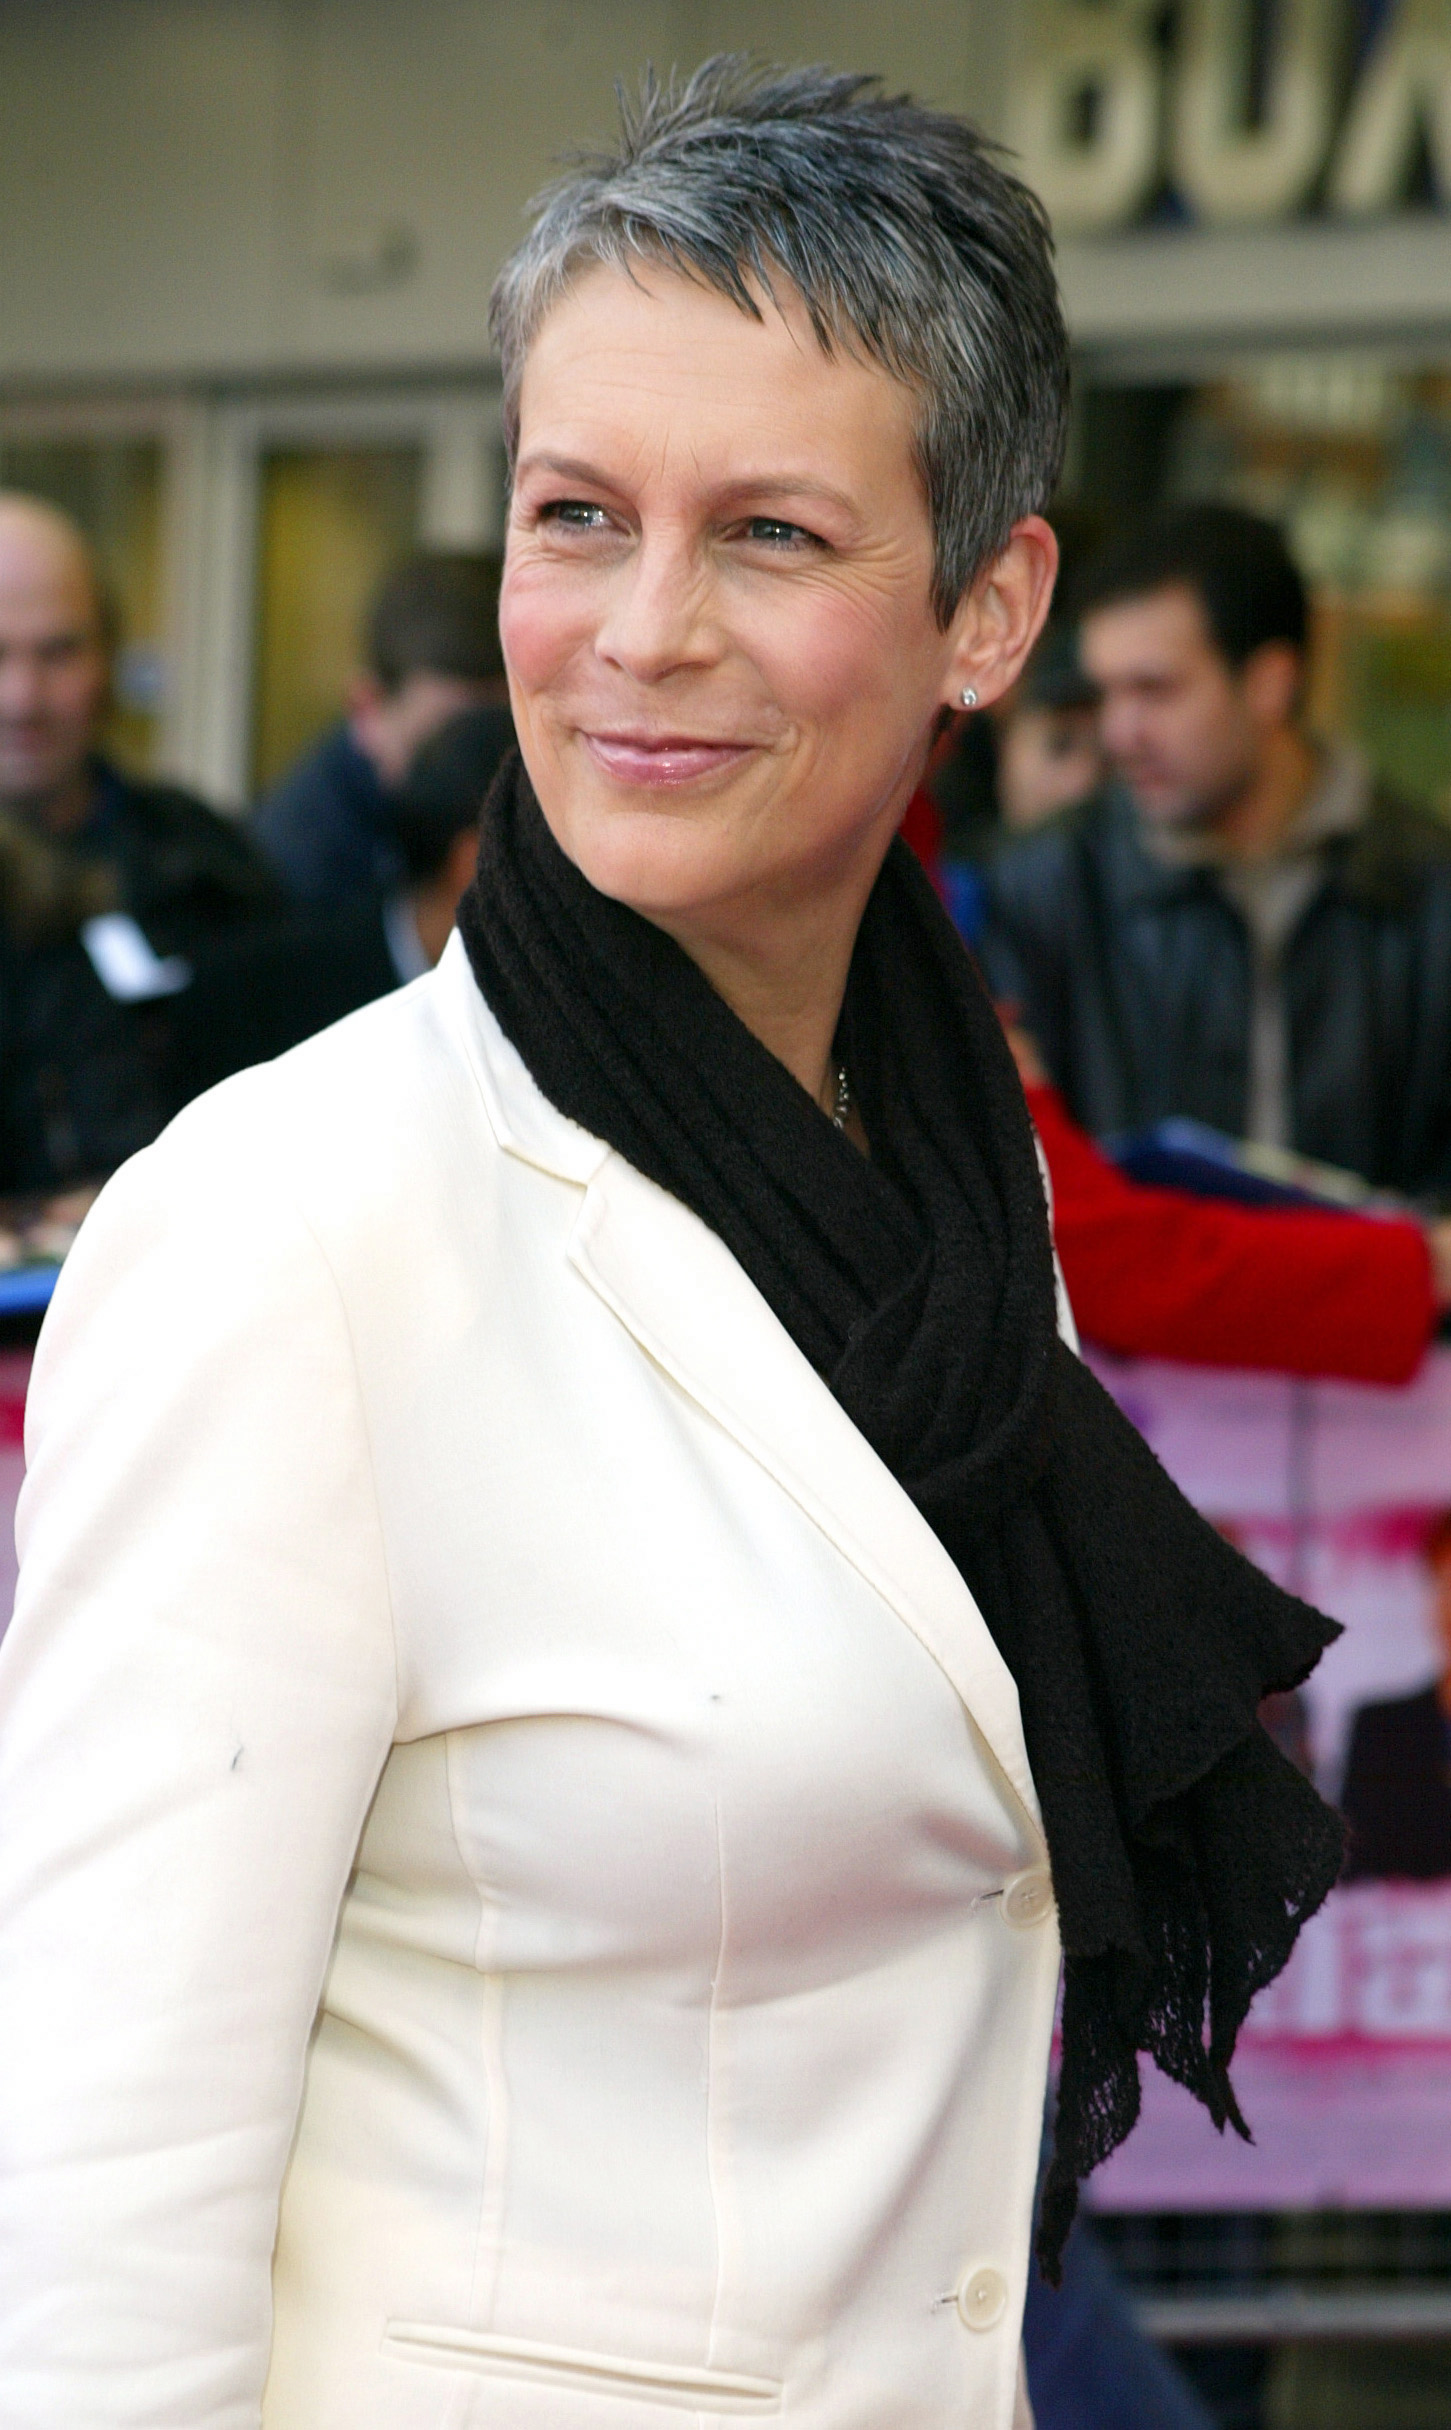 Jamie Lee Curtis at the "Freaky Friday" premiere In London on December 14, 2003 | Source: Getty Images